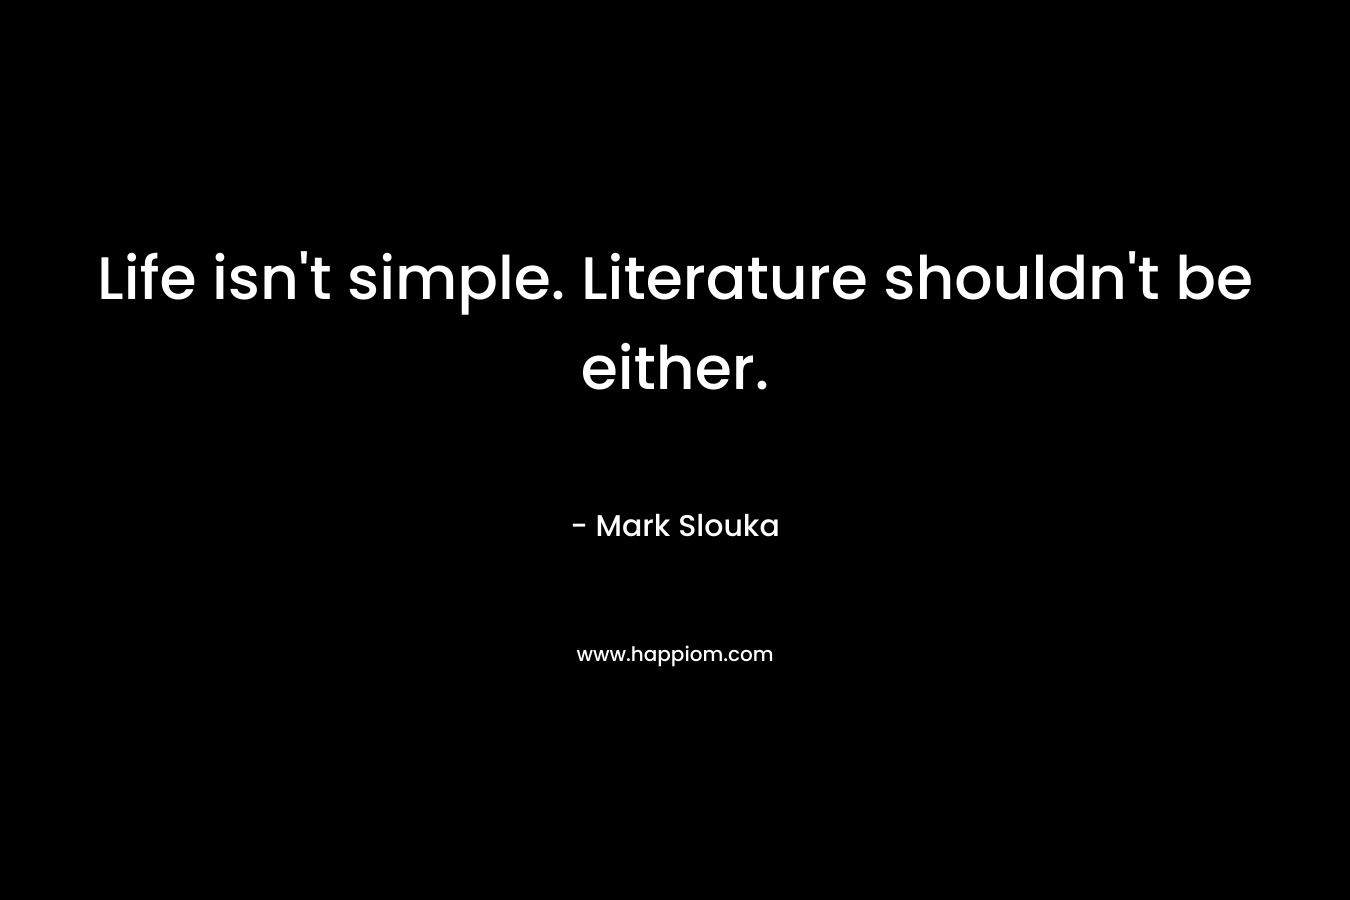 Life isn’t simple. Literature shouldn’t be either. – Mark Slouka